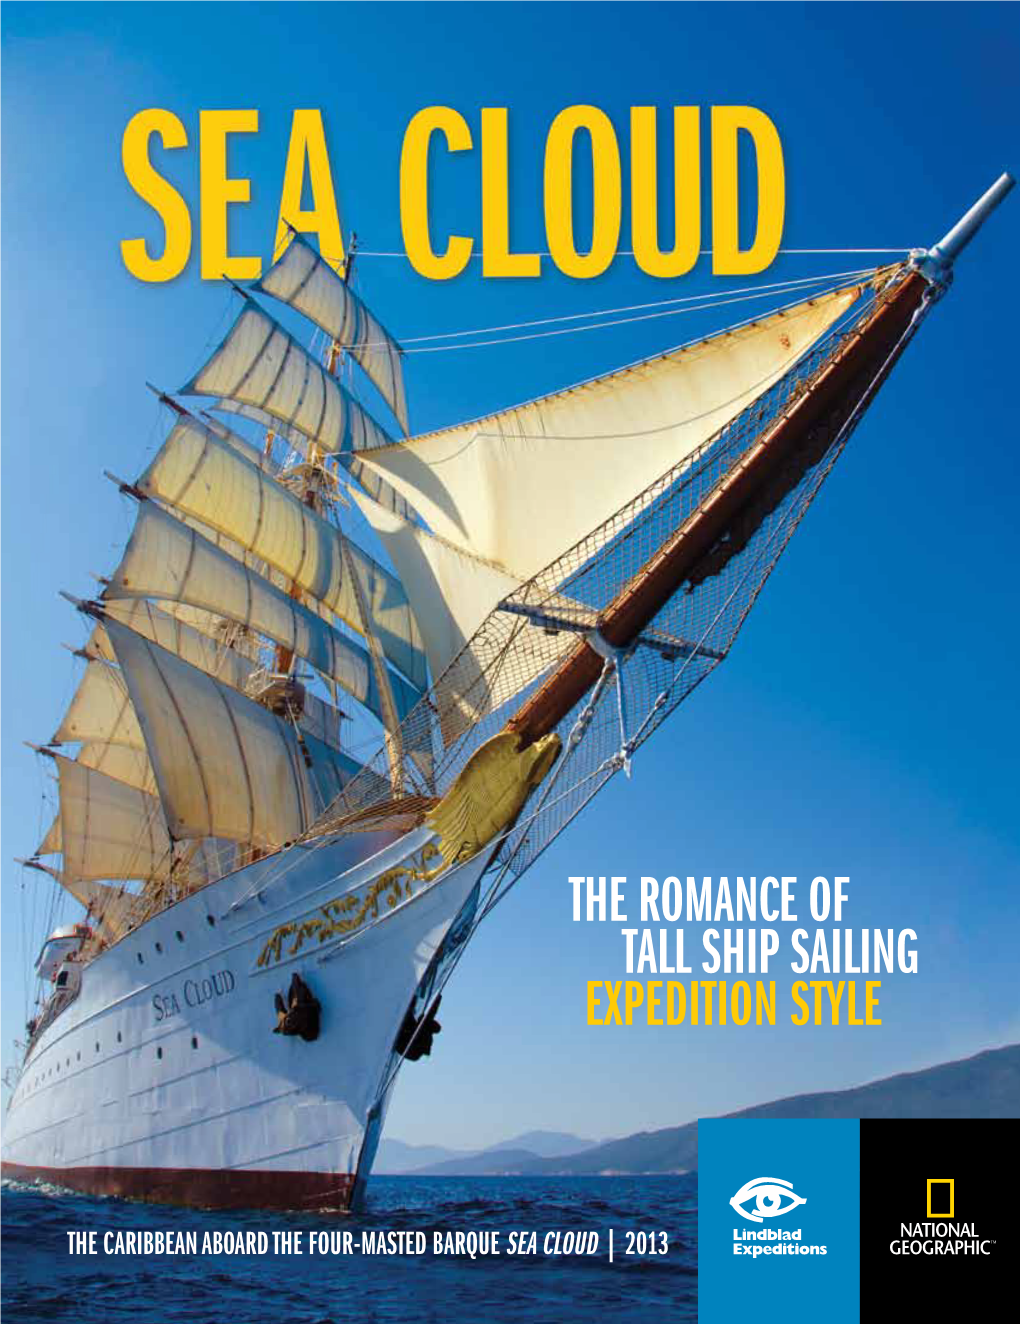 The Romance of Tall Ship Sailing Expedition Style